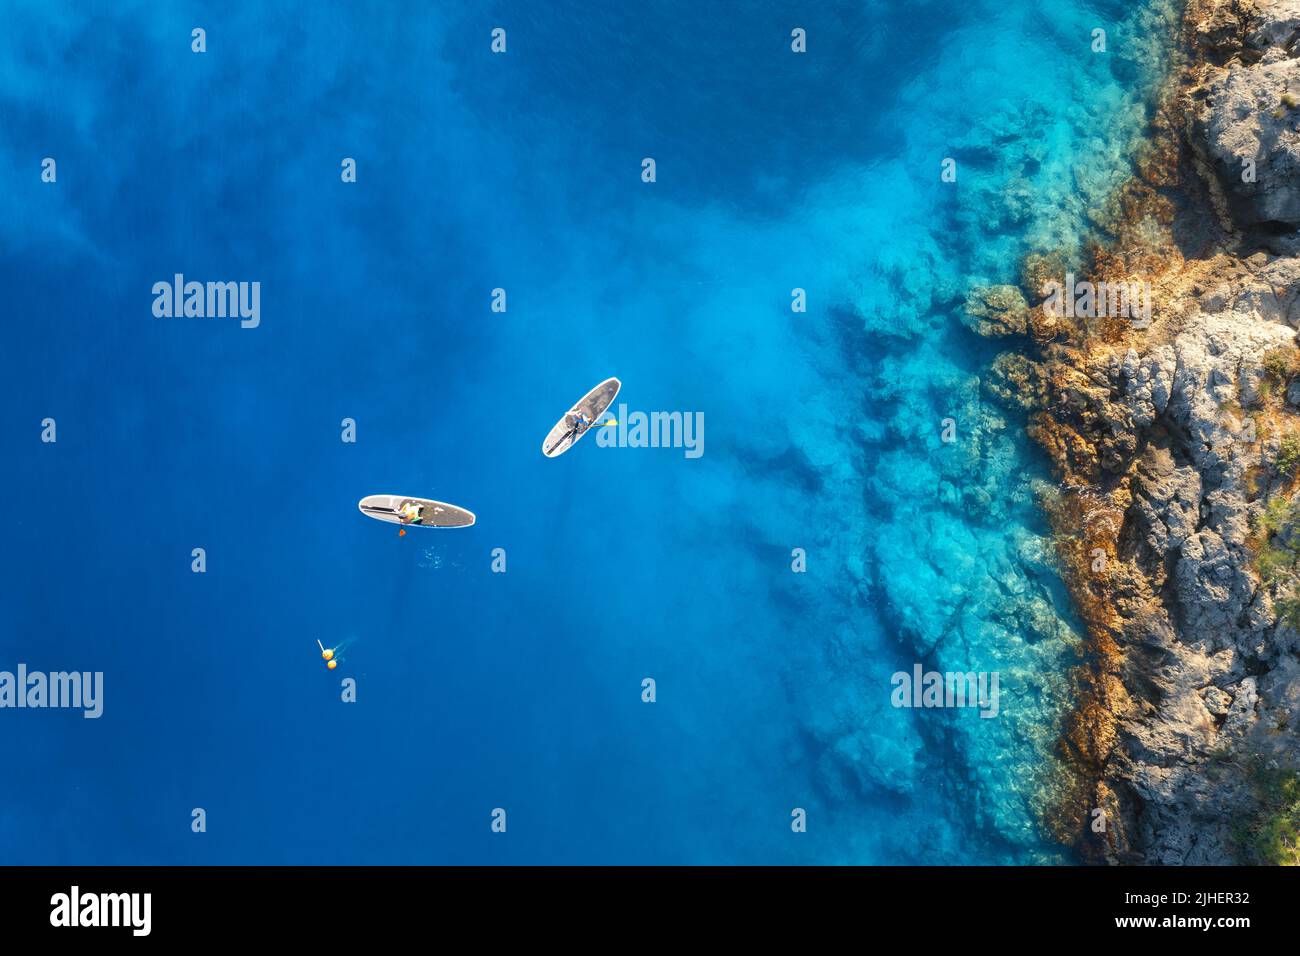 Aerial view of people on floating sup boards on blue sea Stock Photo